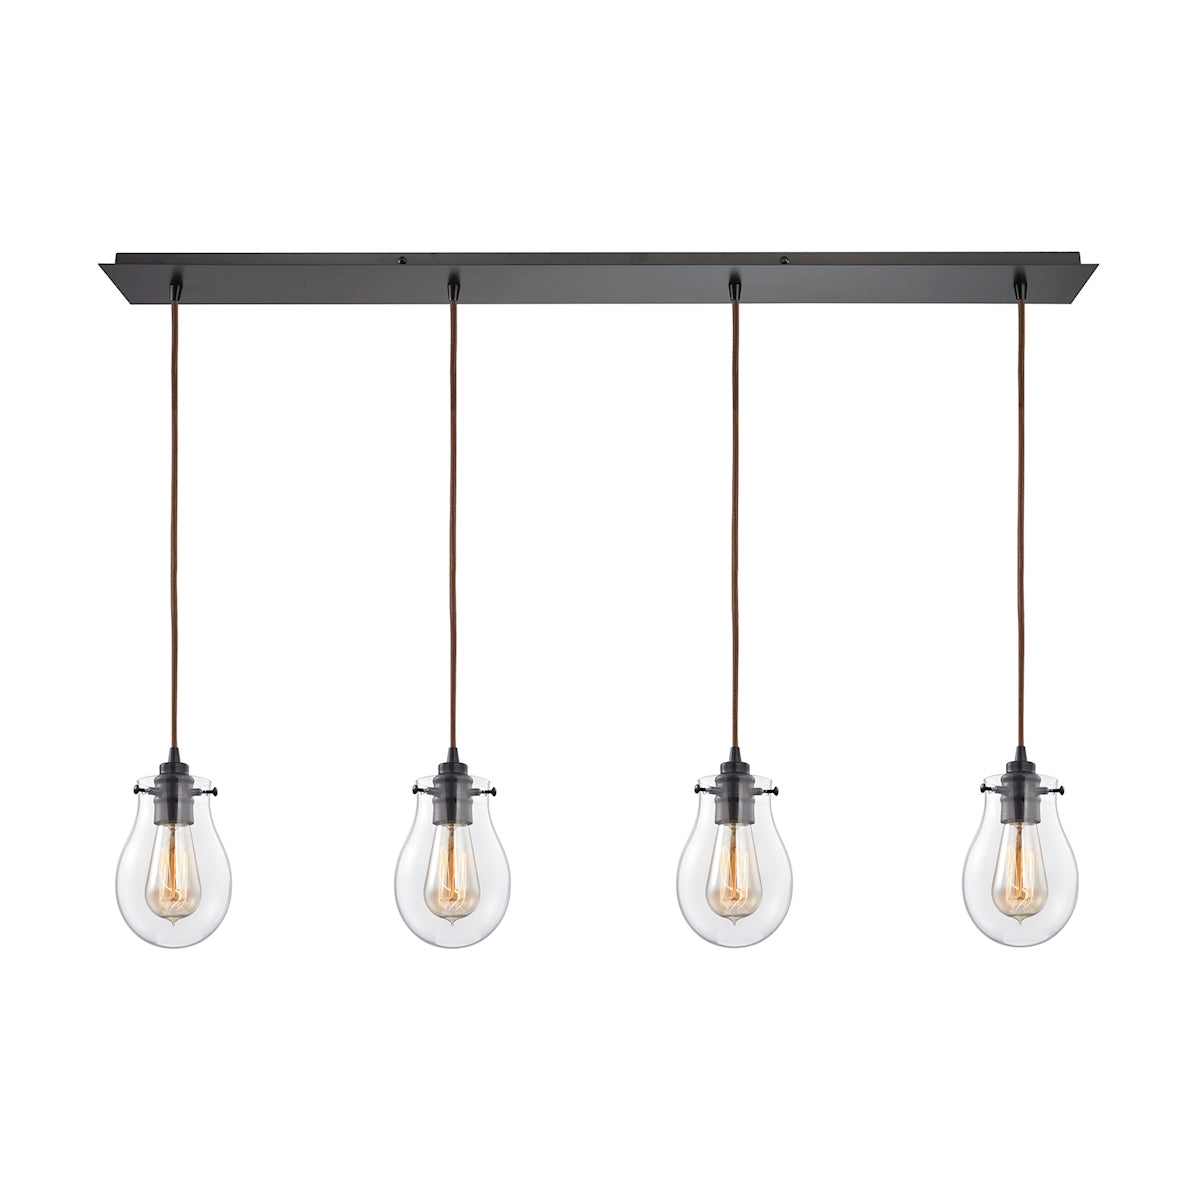 Jaelyn 4-Light Linear Pendant Fixture in Oil Rubbed Bronze with Clear Glass